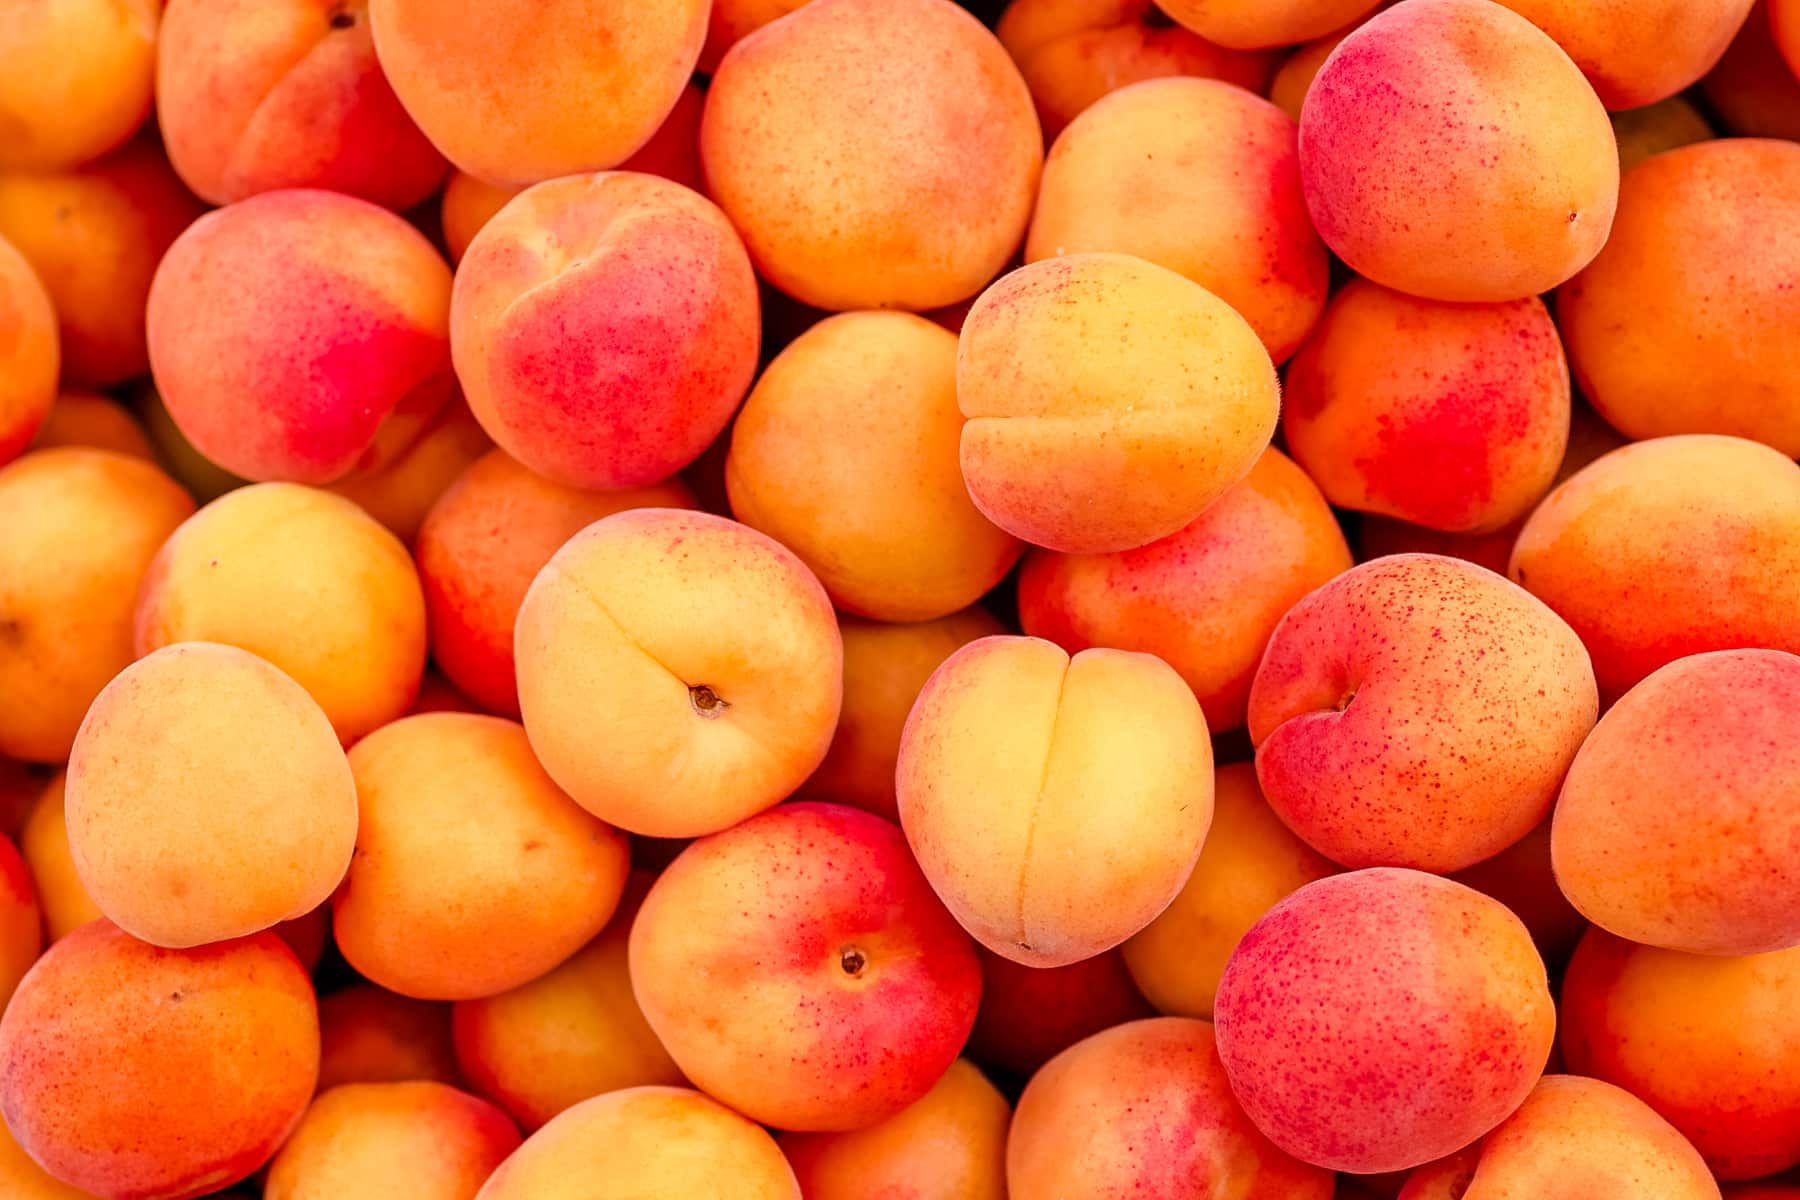 Tasty apricots of yellow, orange, and shades of red in a pile.